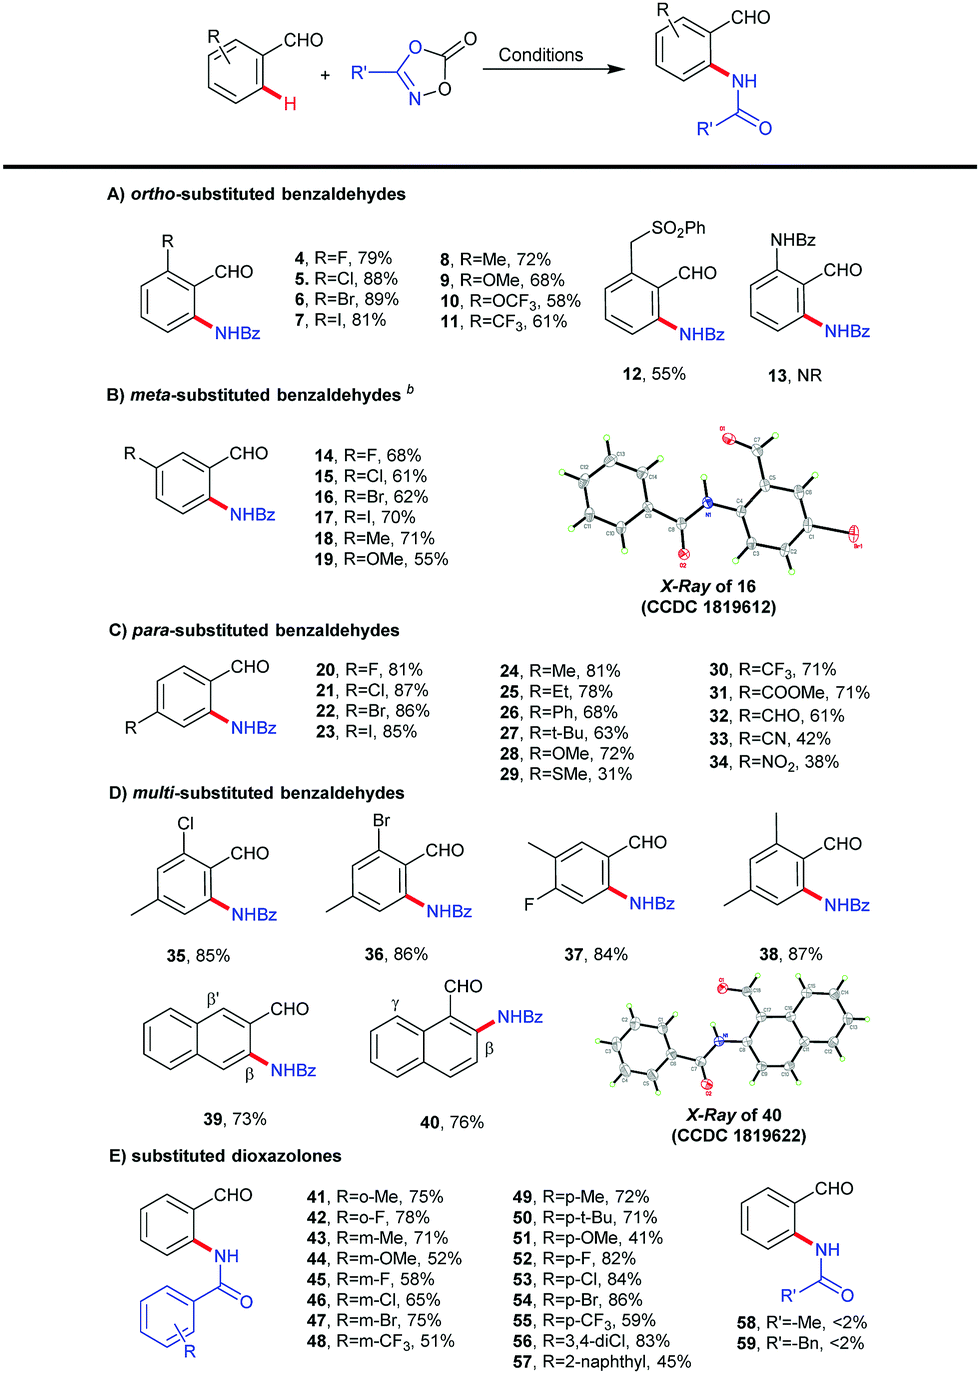 Experimental And Computational Studies On H2o Promoted Rh Catalyzed Transient Ligand Free Ortho C Sp2 H Amidation Of Benzaldehydes With Dioxazolones Chemical Communications Rsc Publishing